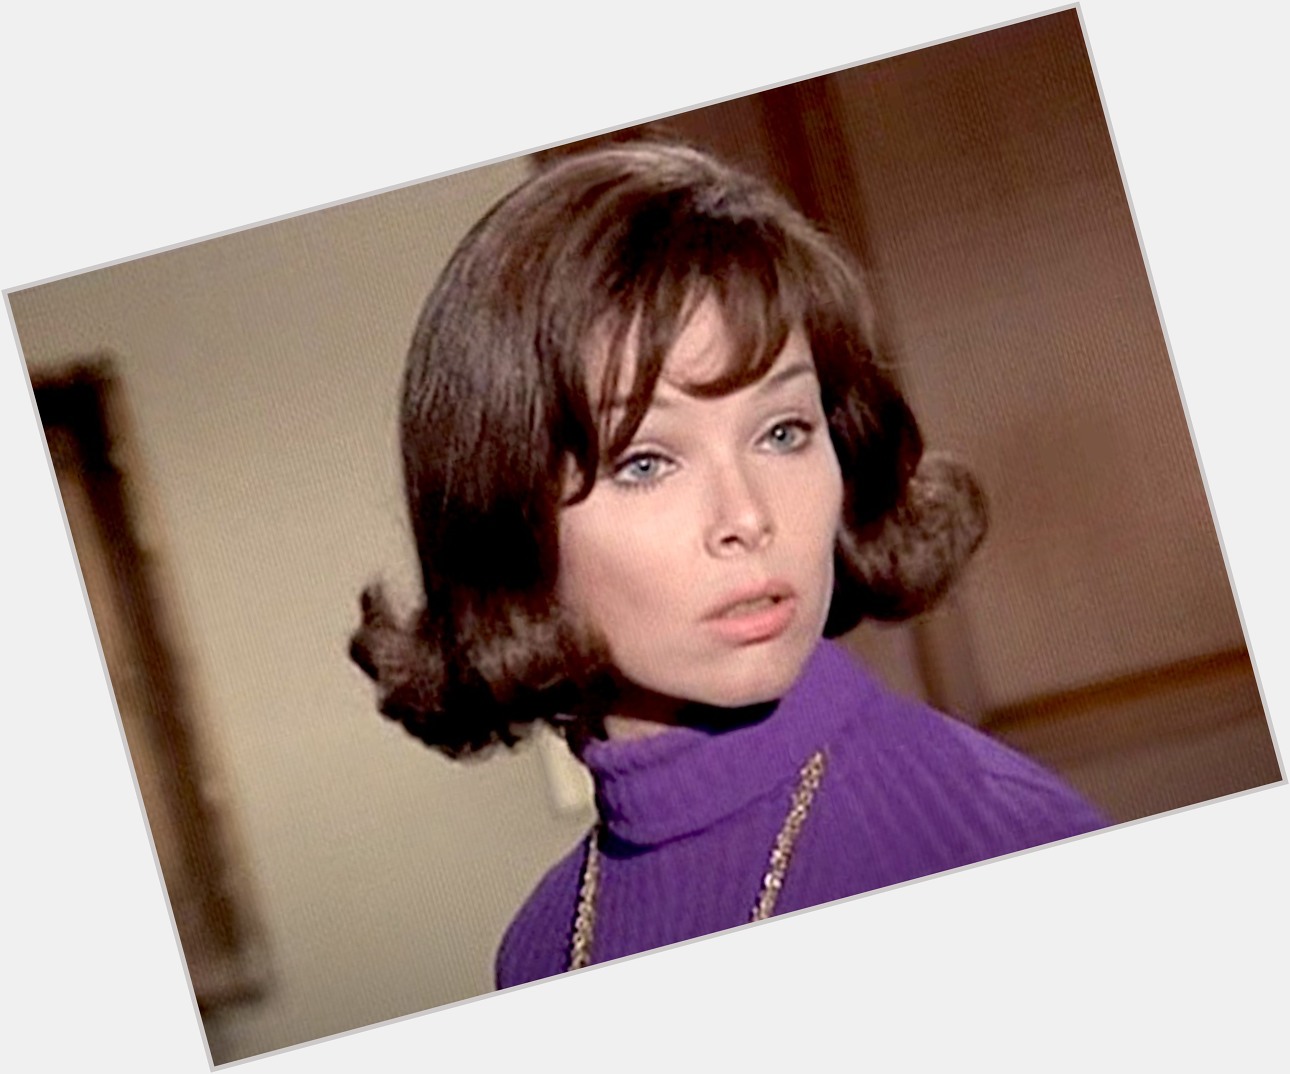 HAPPY BIRTHDAY & RIP YVONNE CRAIG    May 16, 1937 - Aug 17, 2015

How to Frame a Figg (1971) 